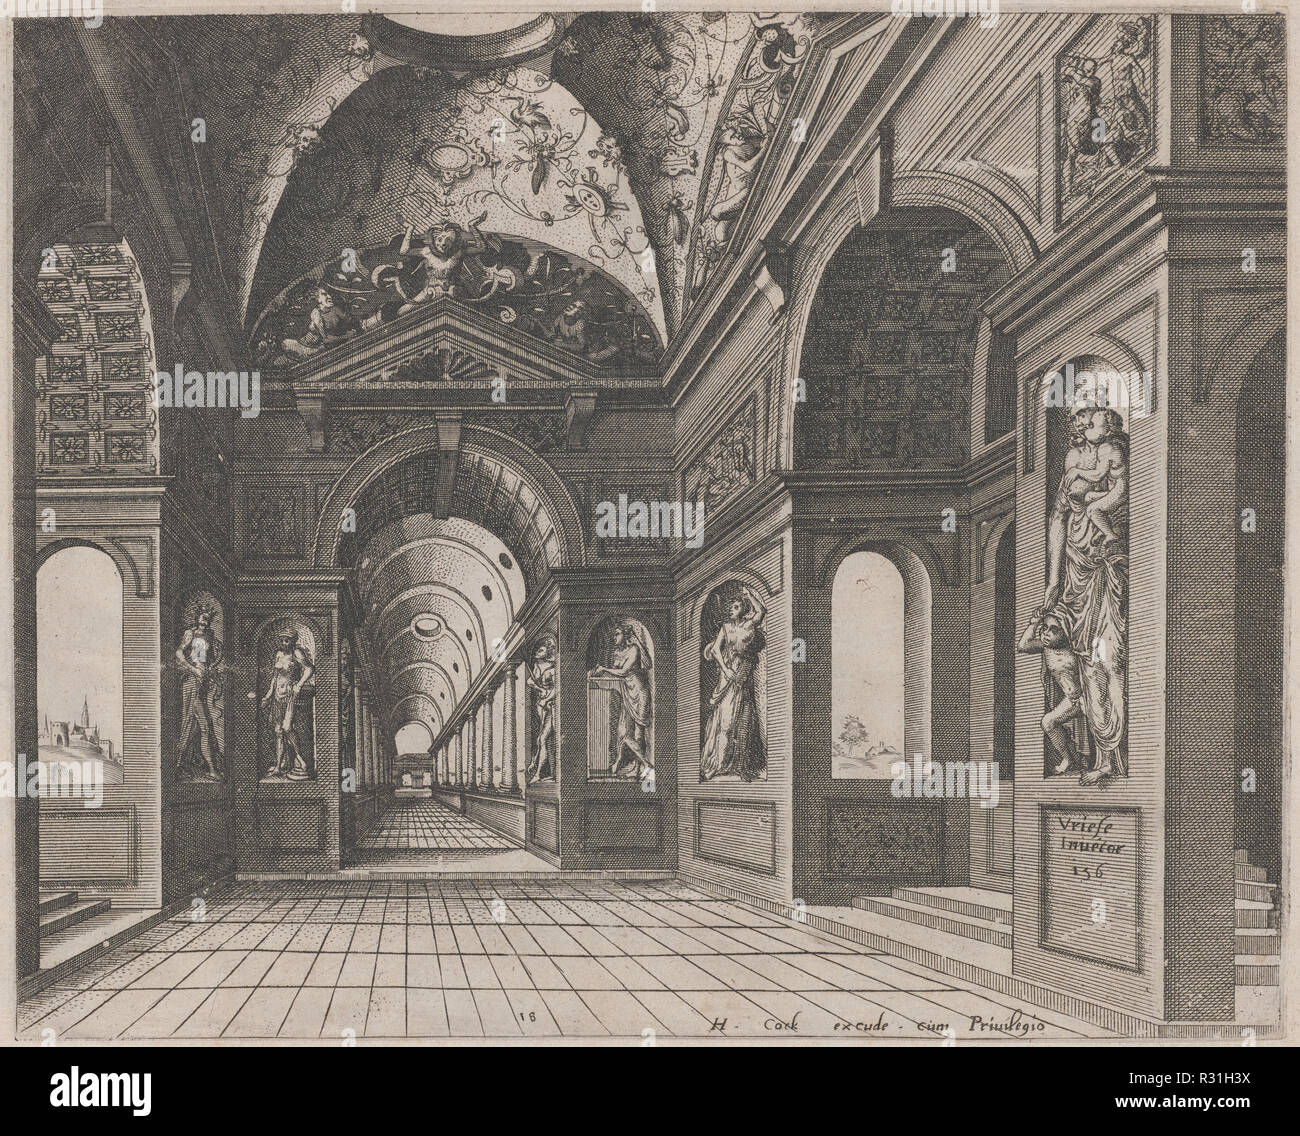 Interior of a Cross-Vaulted Hall Decorated with Grotesques. Dated: 1560. Dimensions: plate: 20.9 × 26 cm (8 1/4 × 10 1/4 in.)  sheet: 25.5 × 36.2 cm (10 1/16 × 14 1/4 in.). Medium: etching on laid paper. Museum: National Gallery of Art, Washington DC. Author: Lucas van Doetechum and Johannes van Doetechum, the Elder, after Hans Vredeman de Vries. Johannes van Doetecum the elder. after Hans Vredeman de Vries. Lucas van Doetecum. Stock Photo